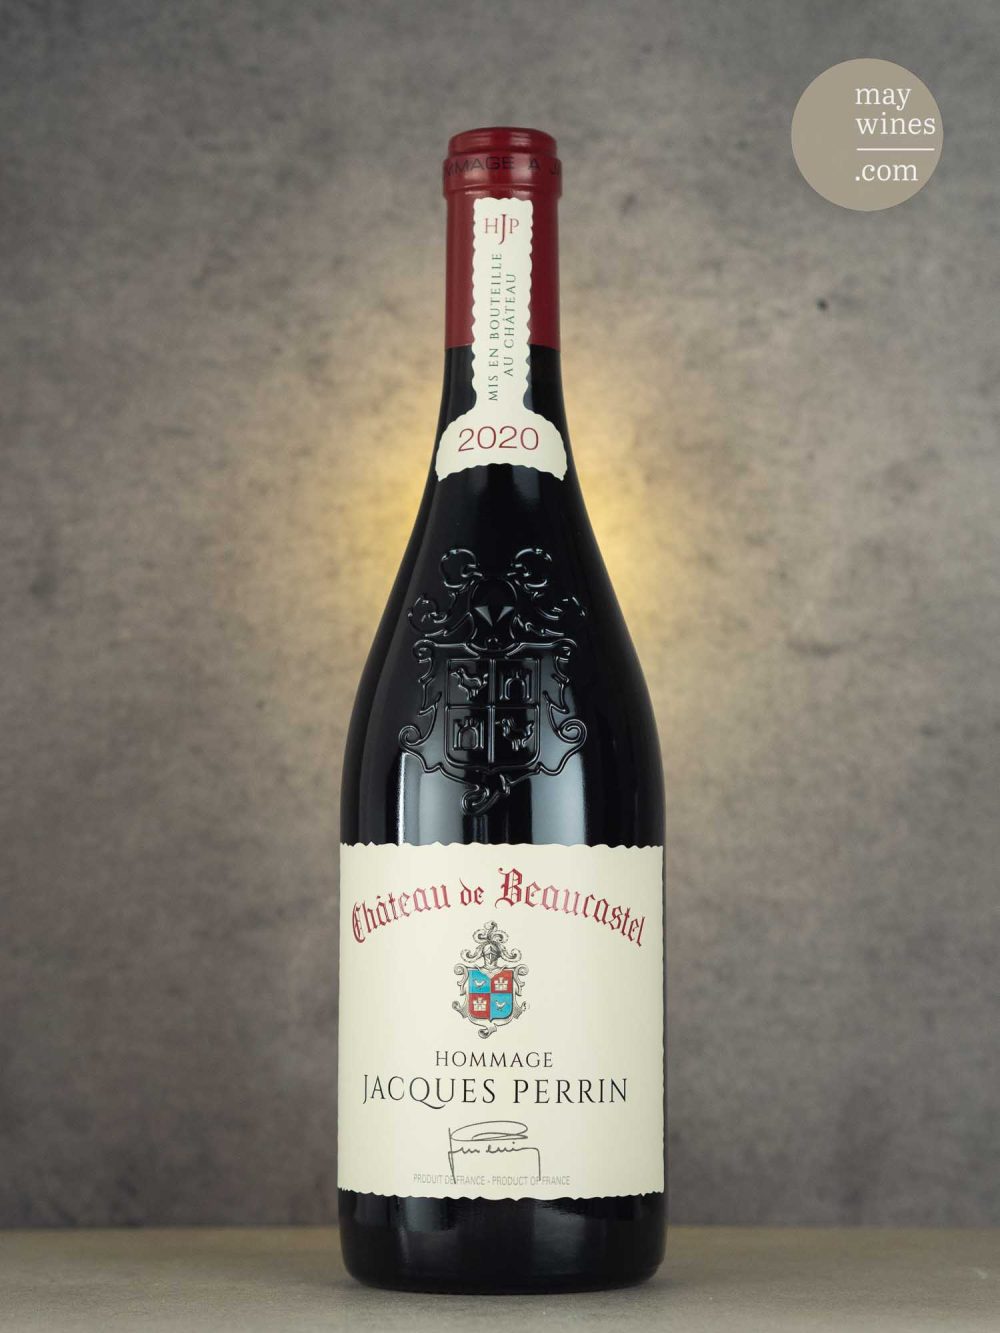 May Wines – Rotwein – 2020 Hommage á Jacques Perrin - Château de Beaucastel